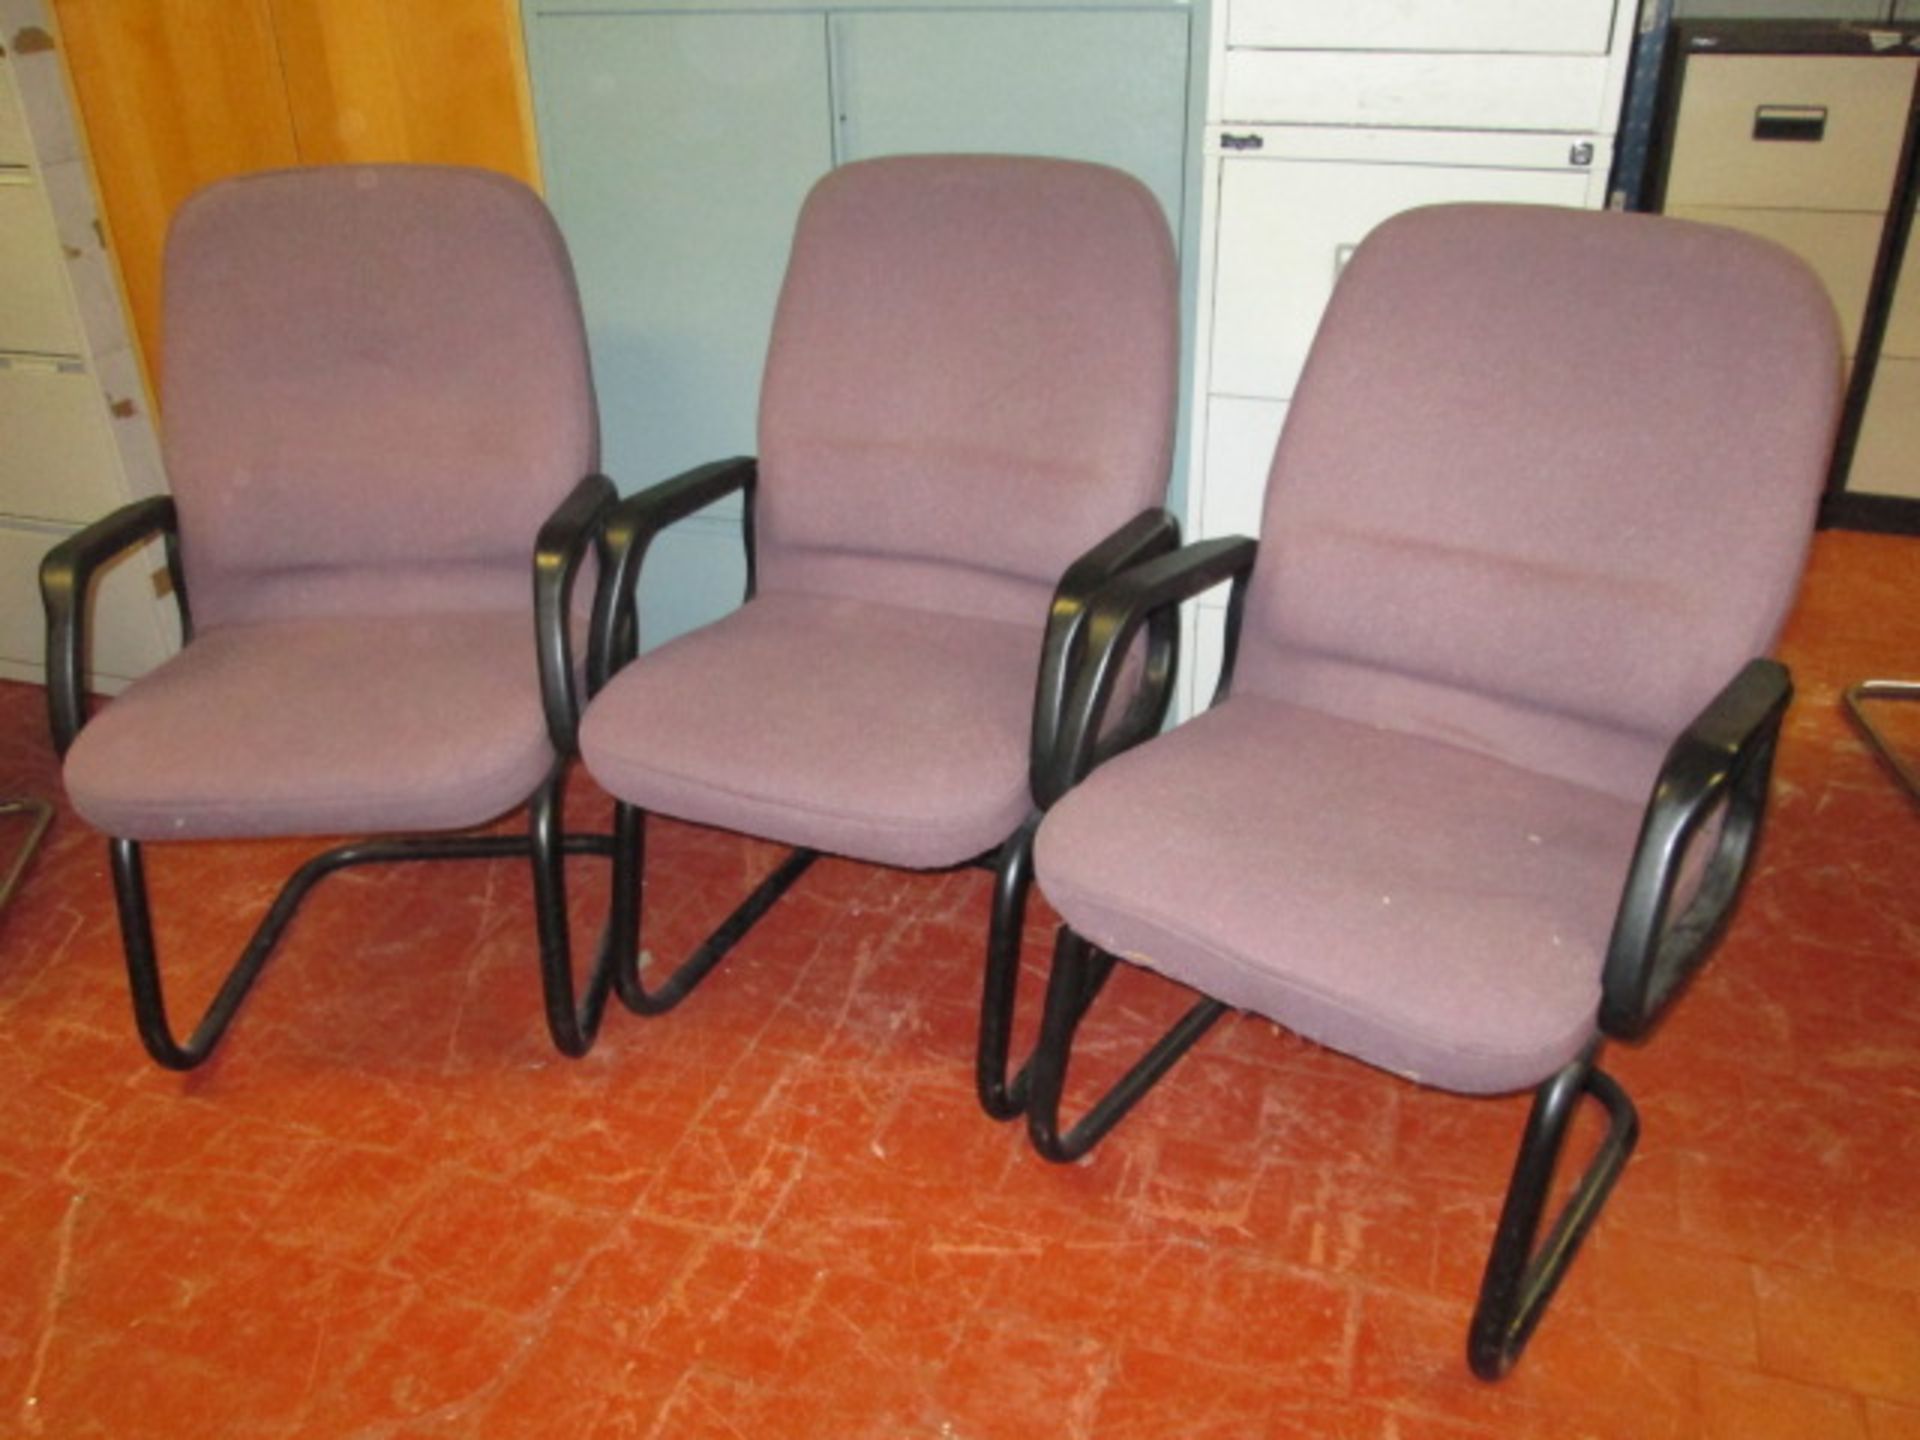 3 x Aubergine Coloured Material Cantilever Chairs